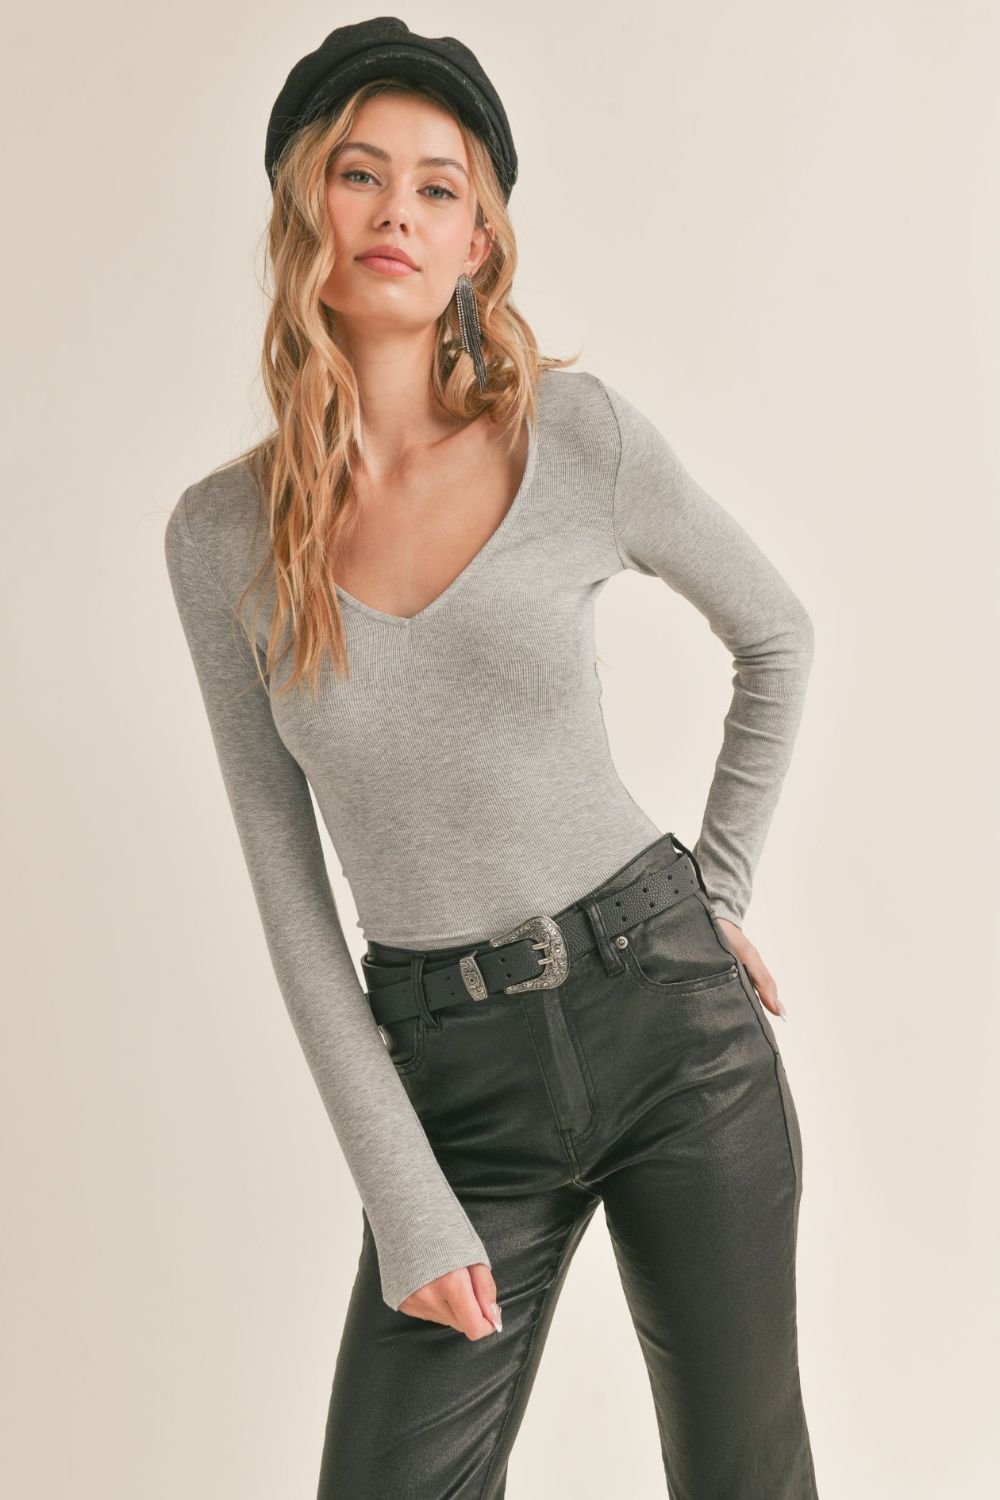 Women's Basic Baby Rib Knit Long Sleeve Top | Heather Gray - Women's Shirts & Tops - Blooming Daily